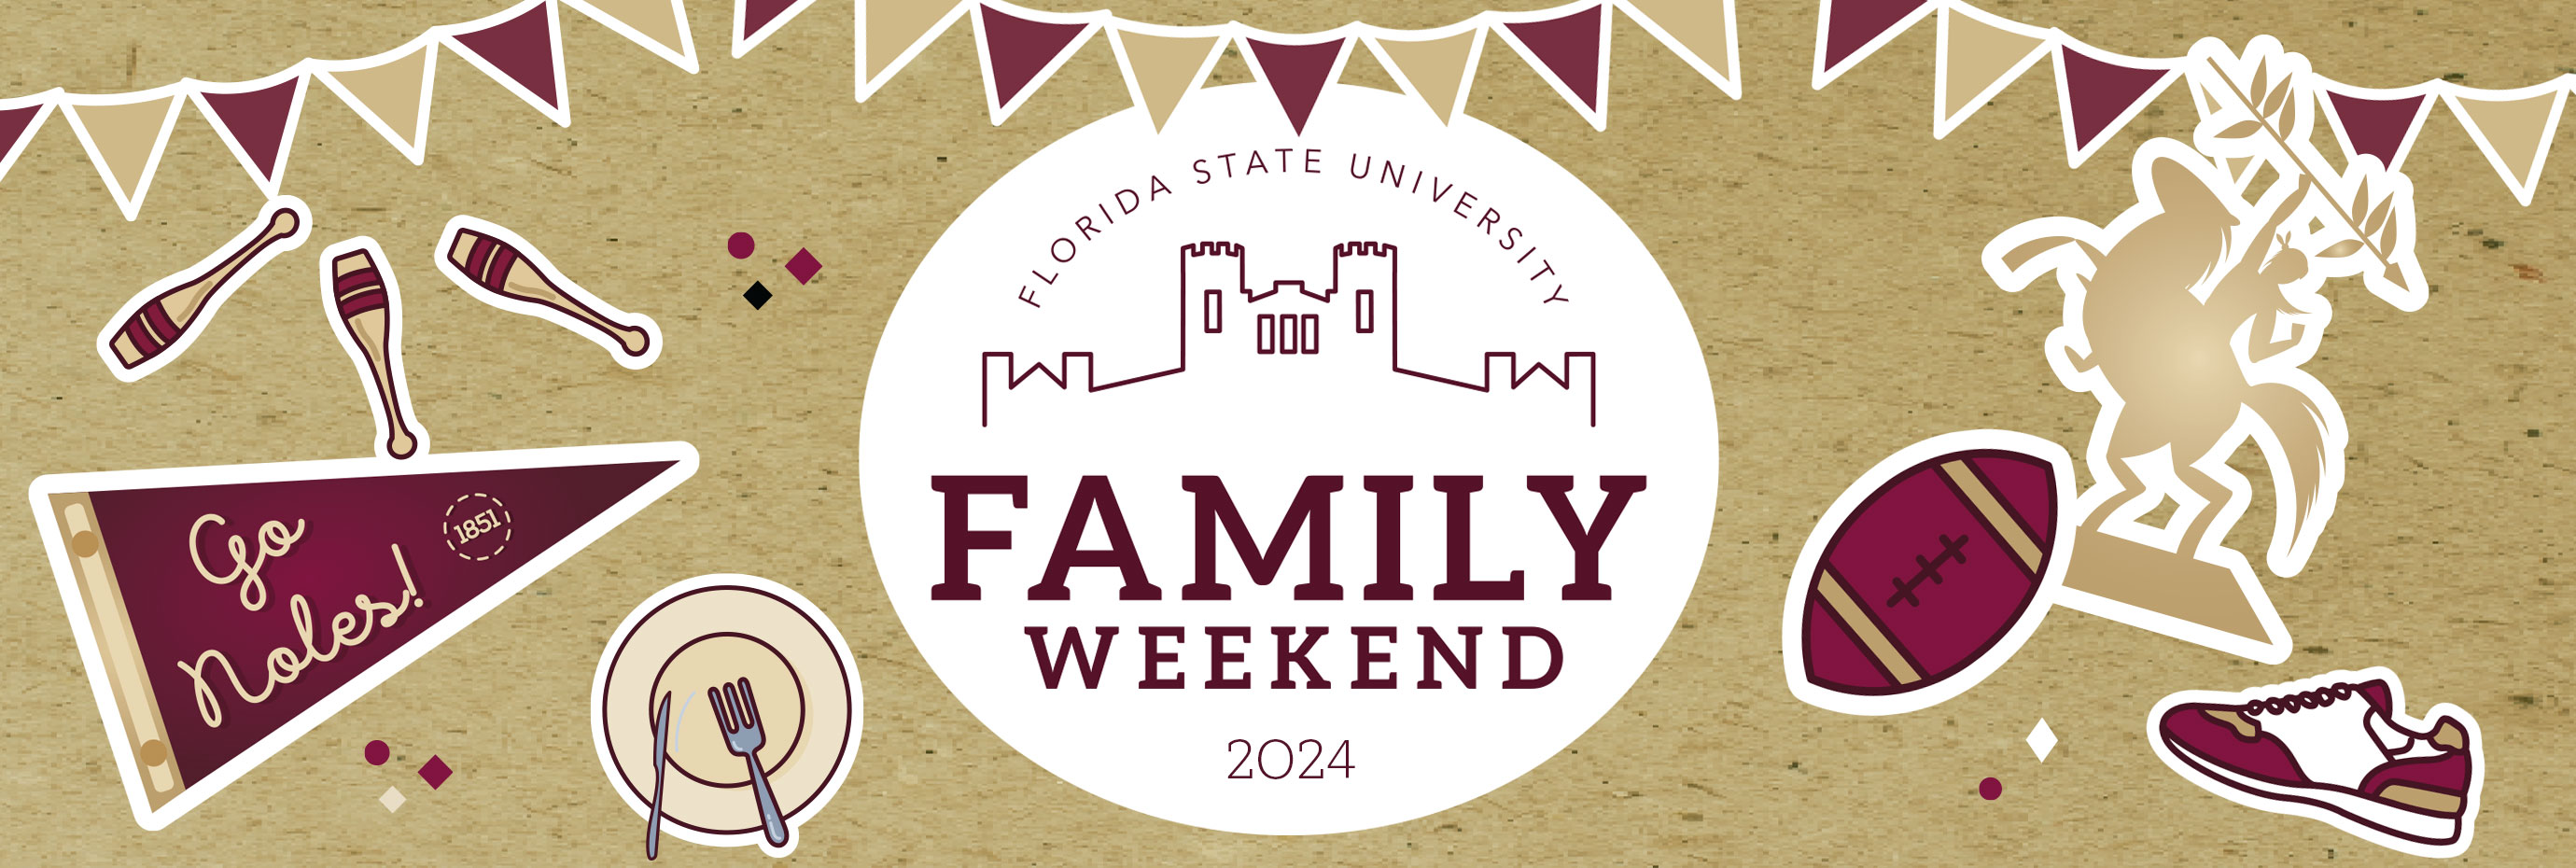 Family Weekend 2023